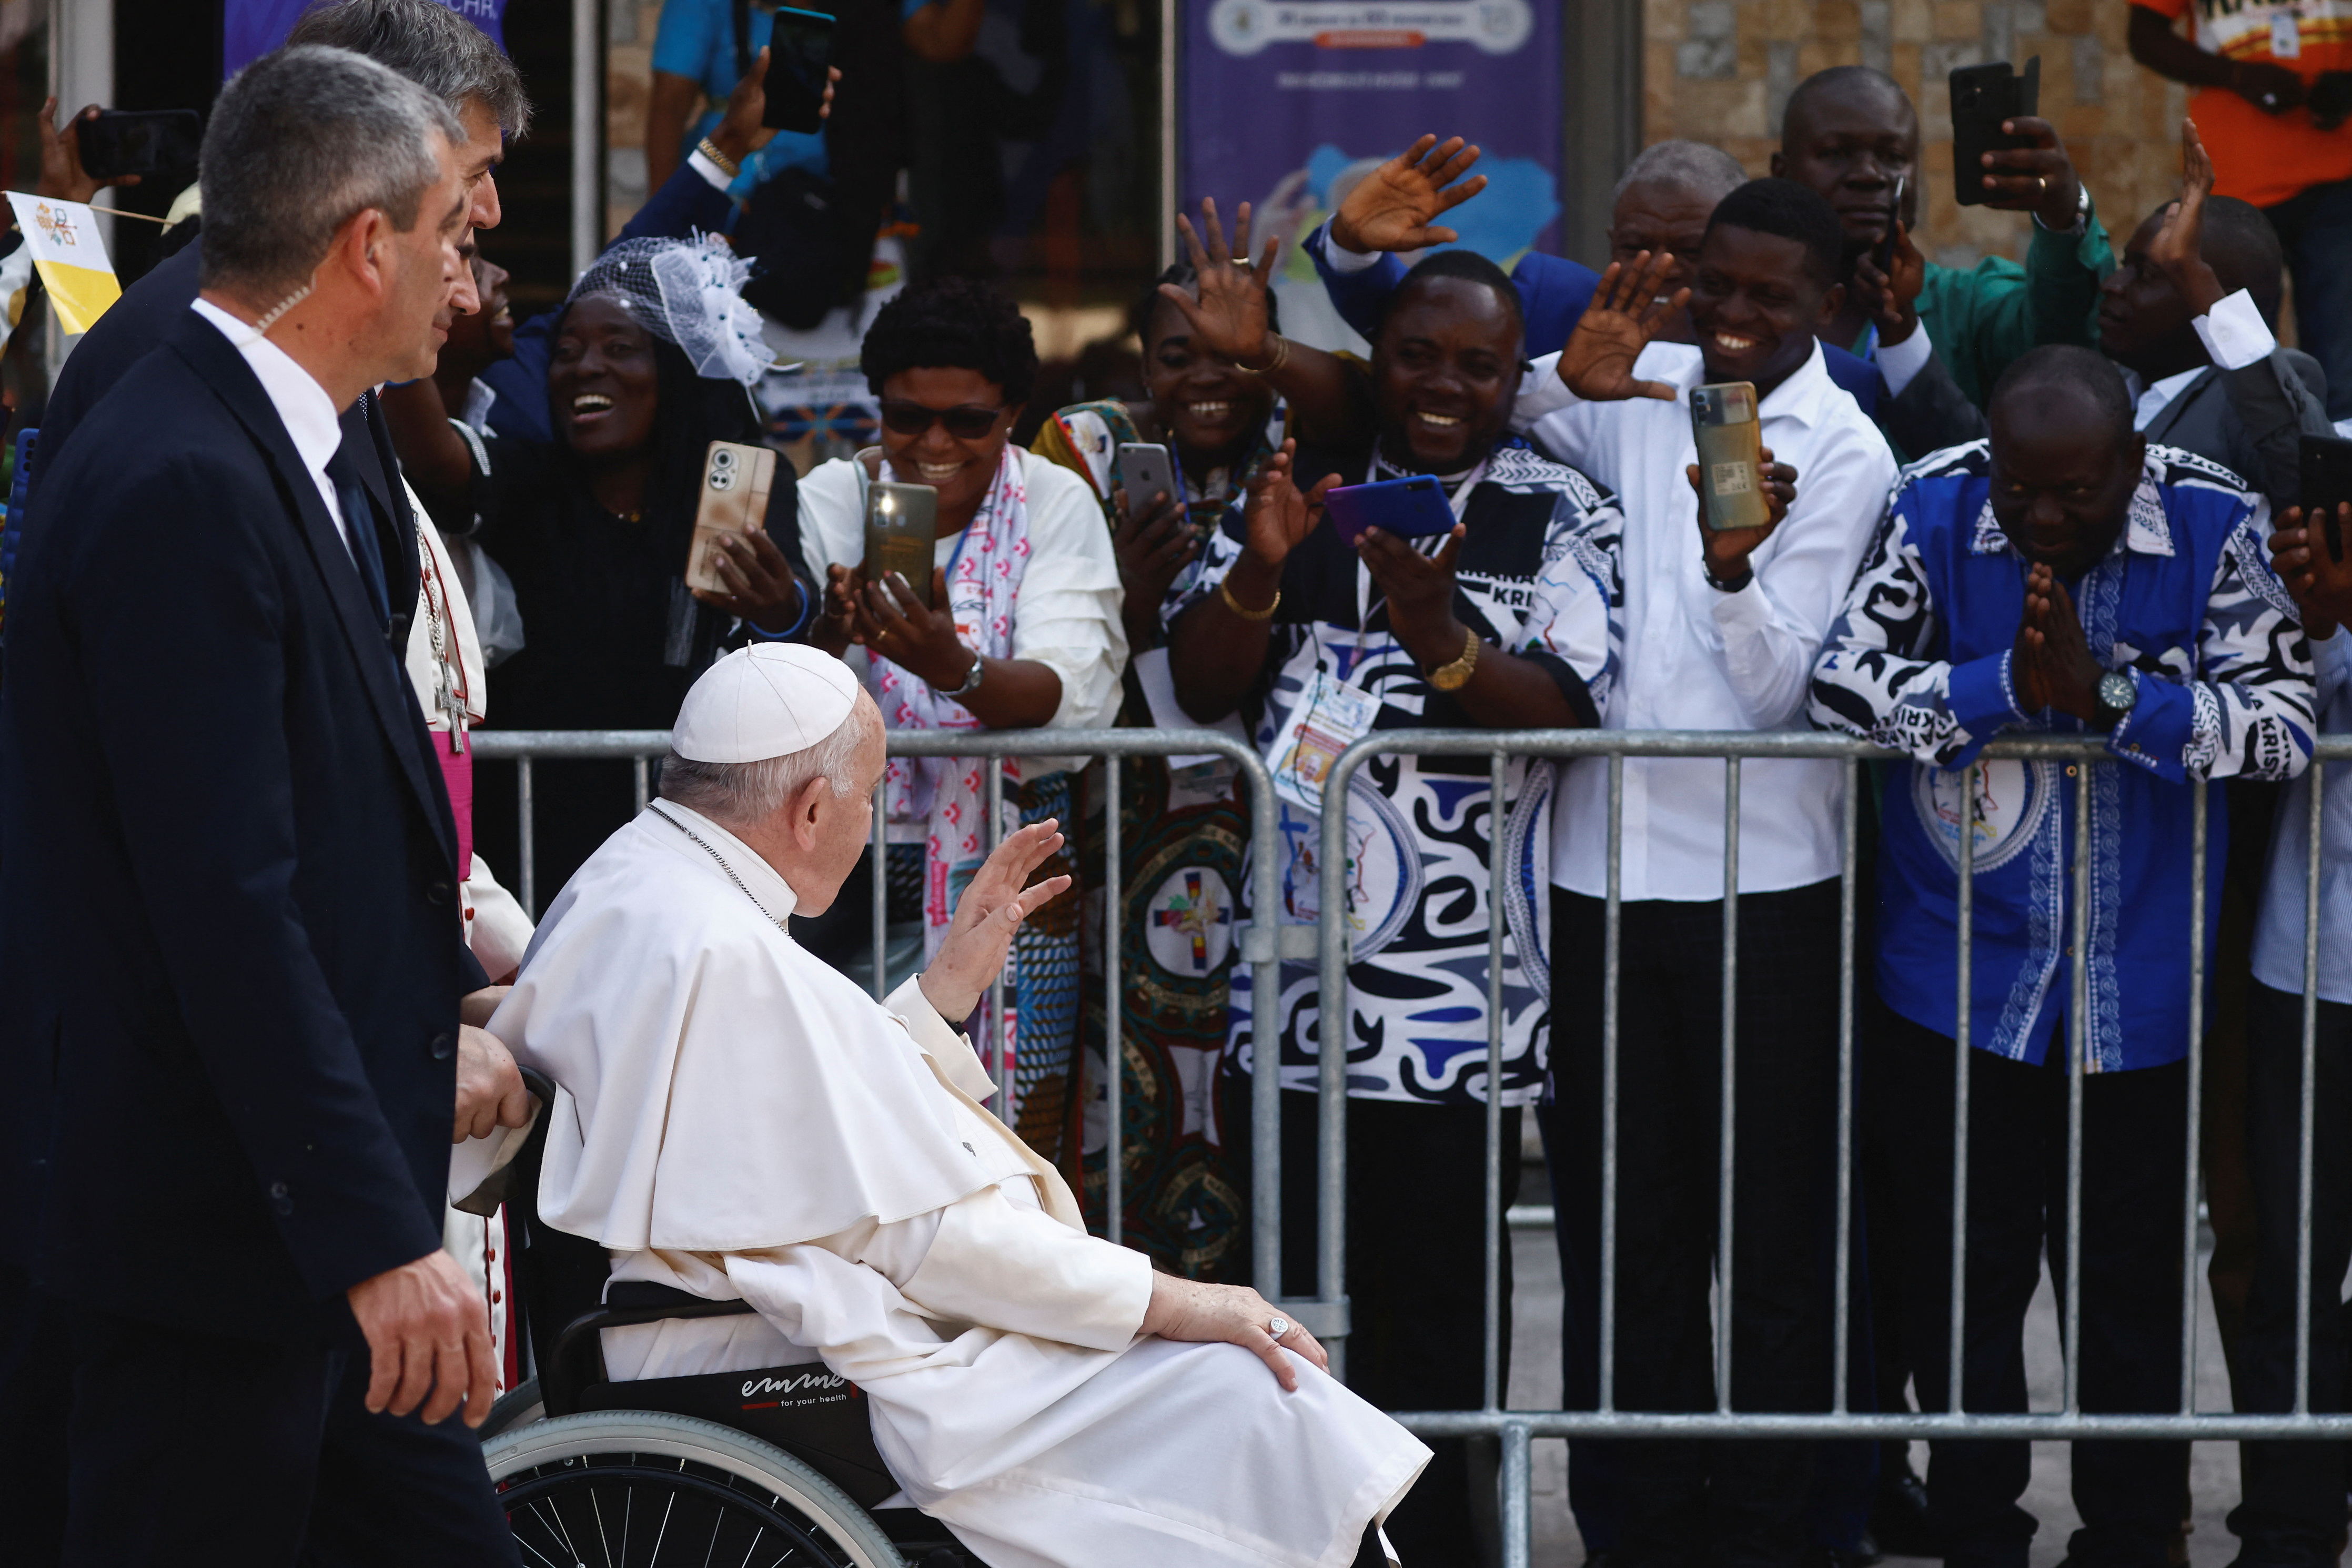 Pope Francis visits Congo